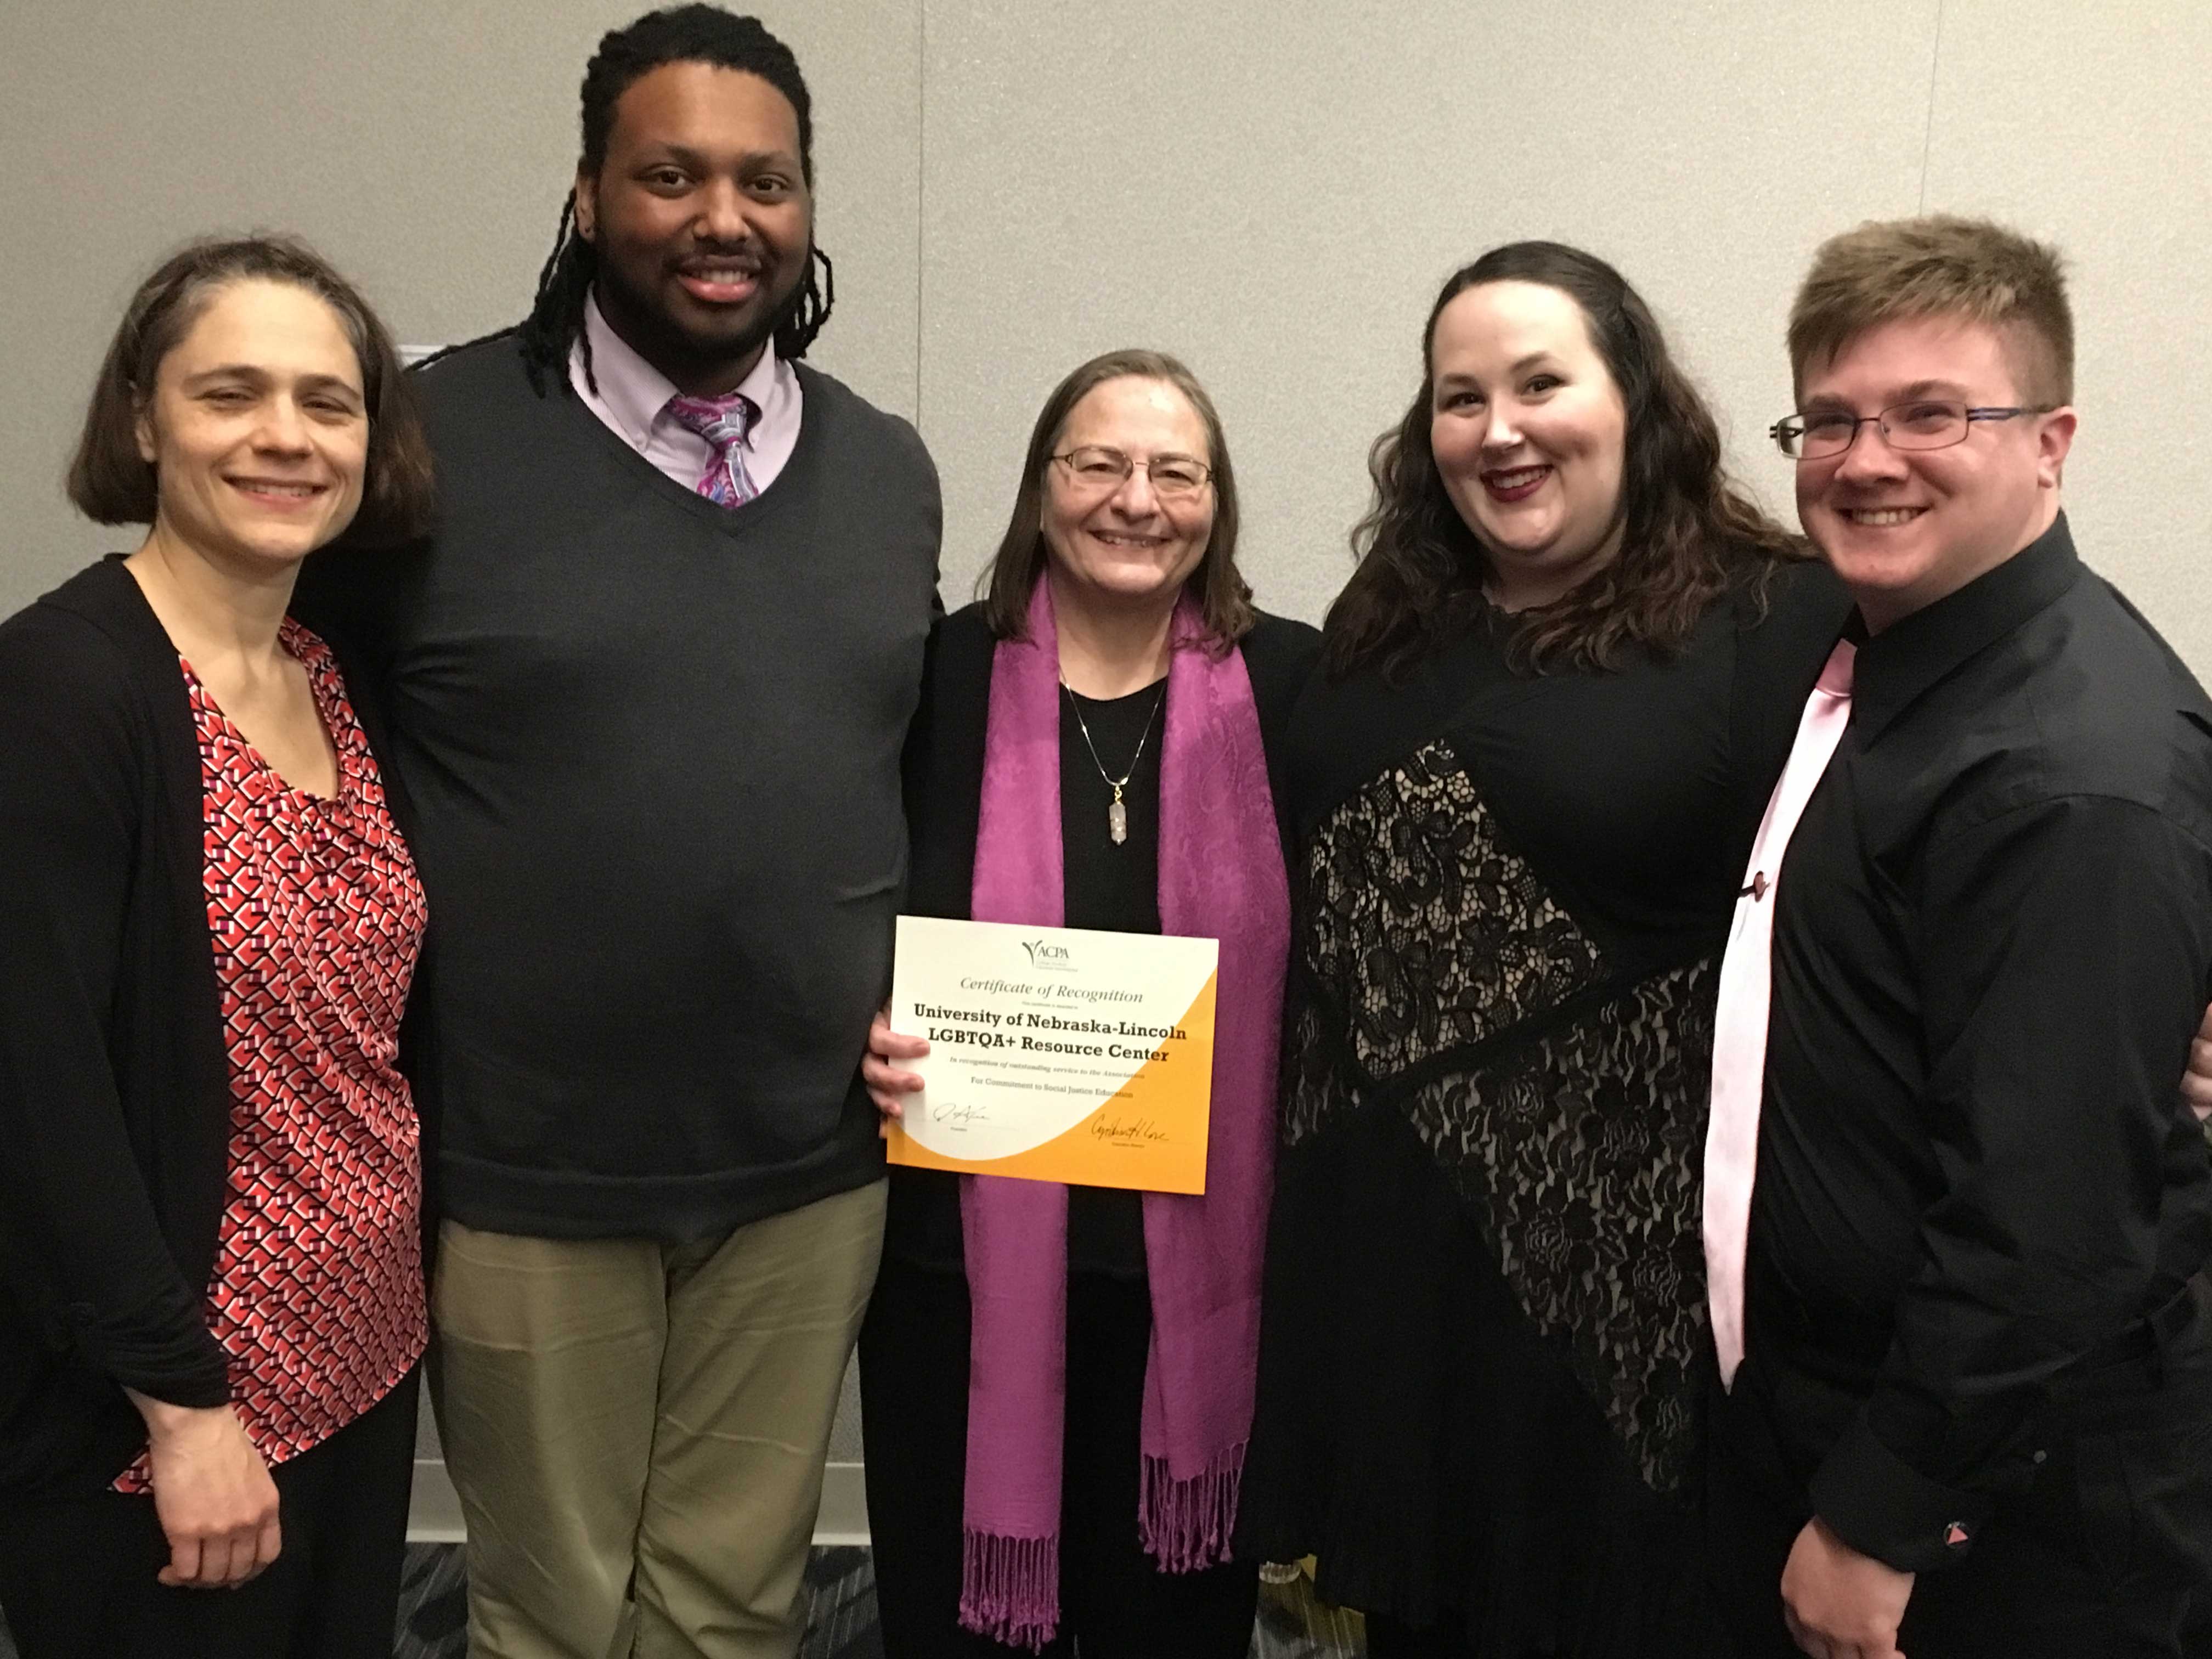 The Nebraska LGBTQA Resource Center accepts an ACPA award for Commitment to Social Justice Education.